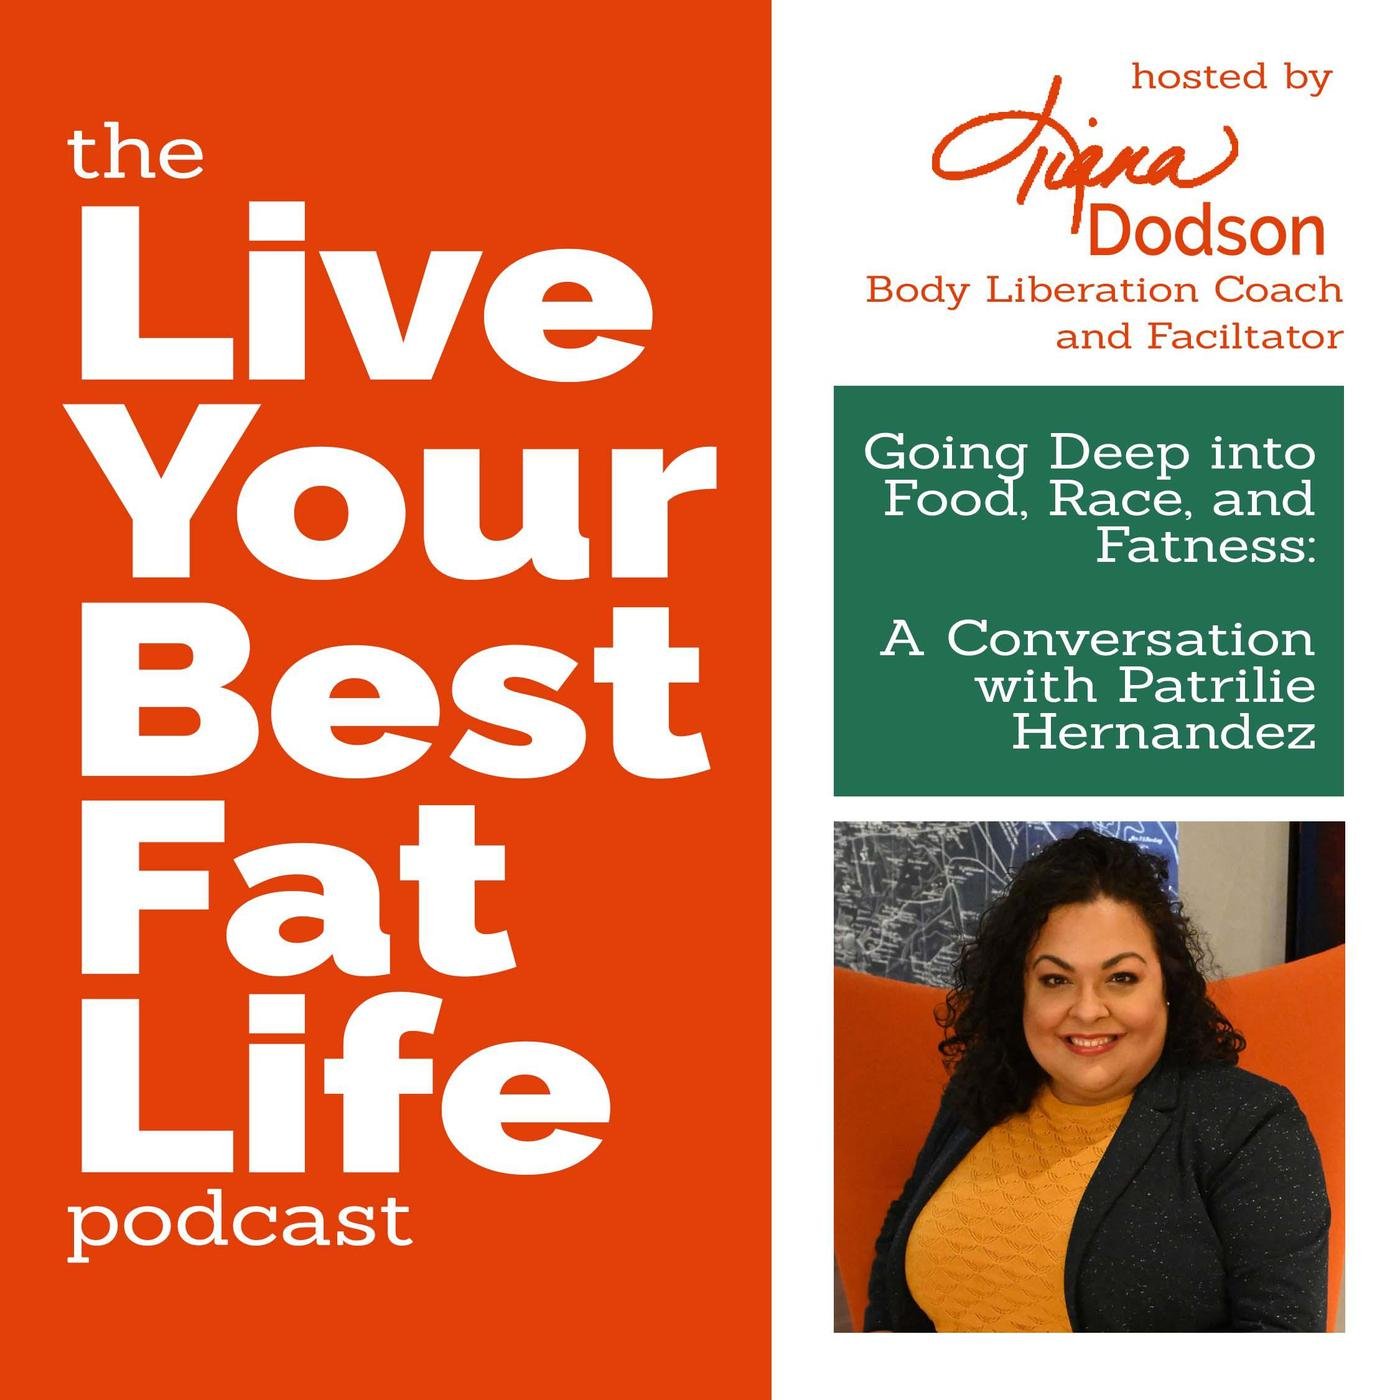 Live Your Best Fat Life Podcast